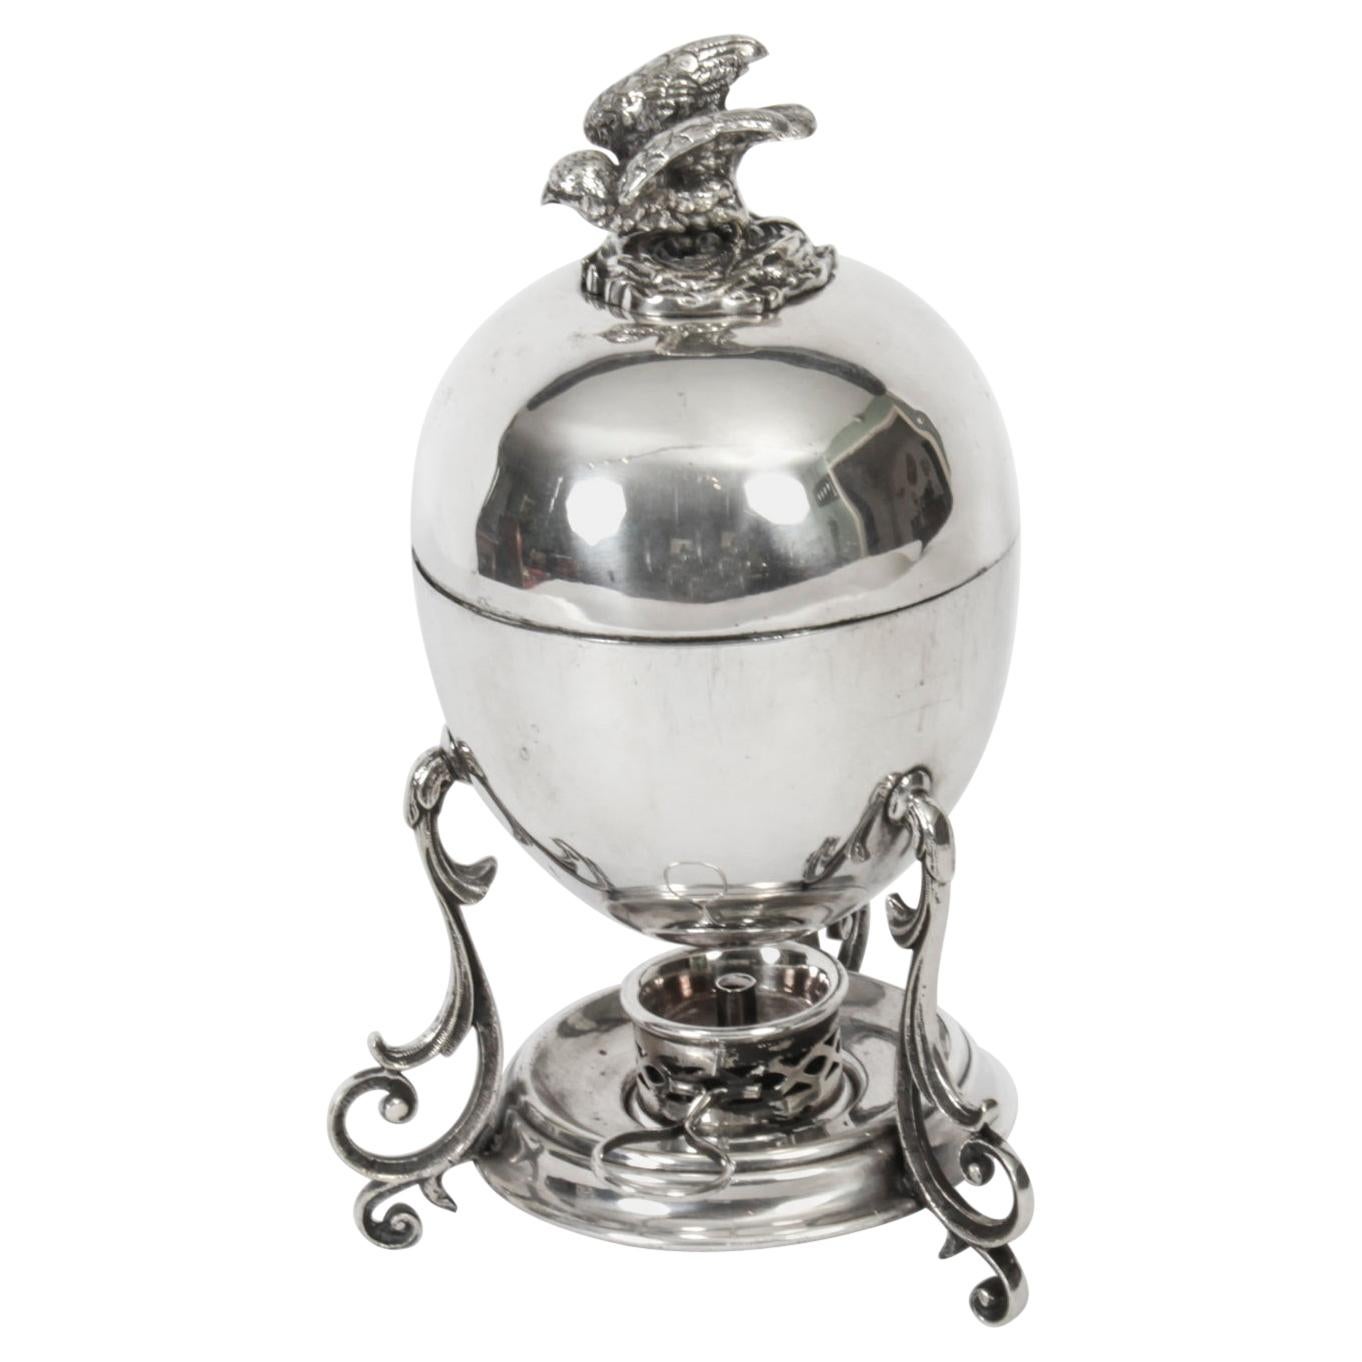 Antique Victorian Silver Plated Egg Coddler / Boiler, 19th Century